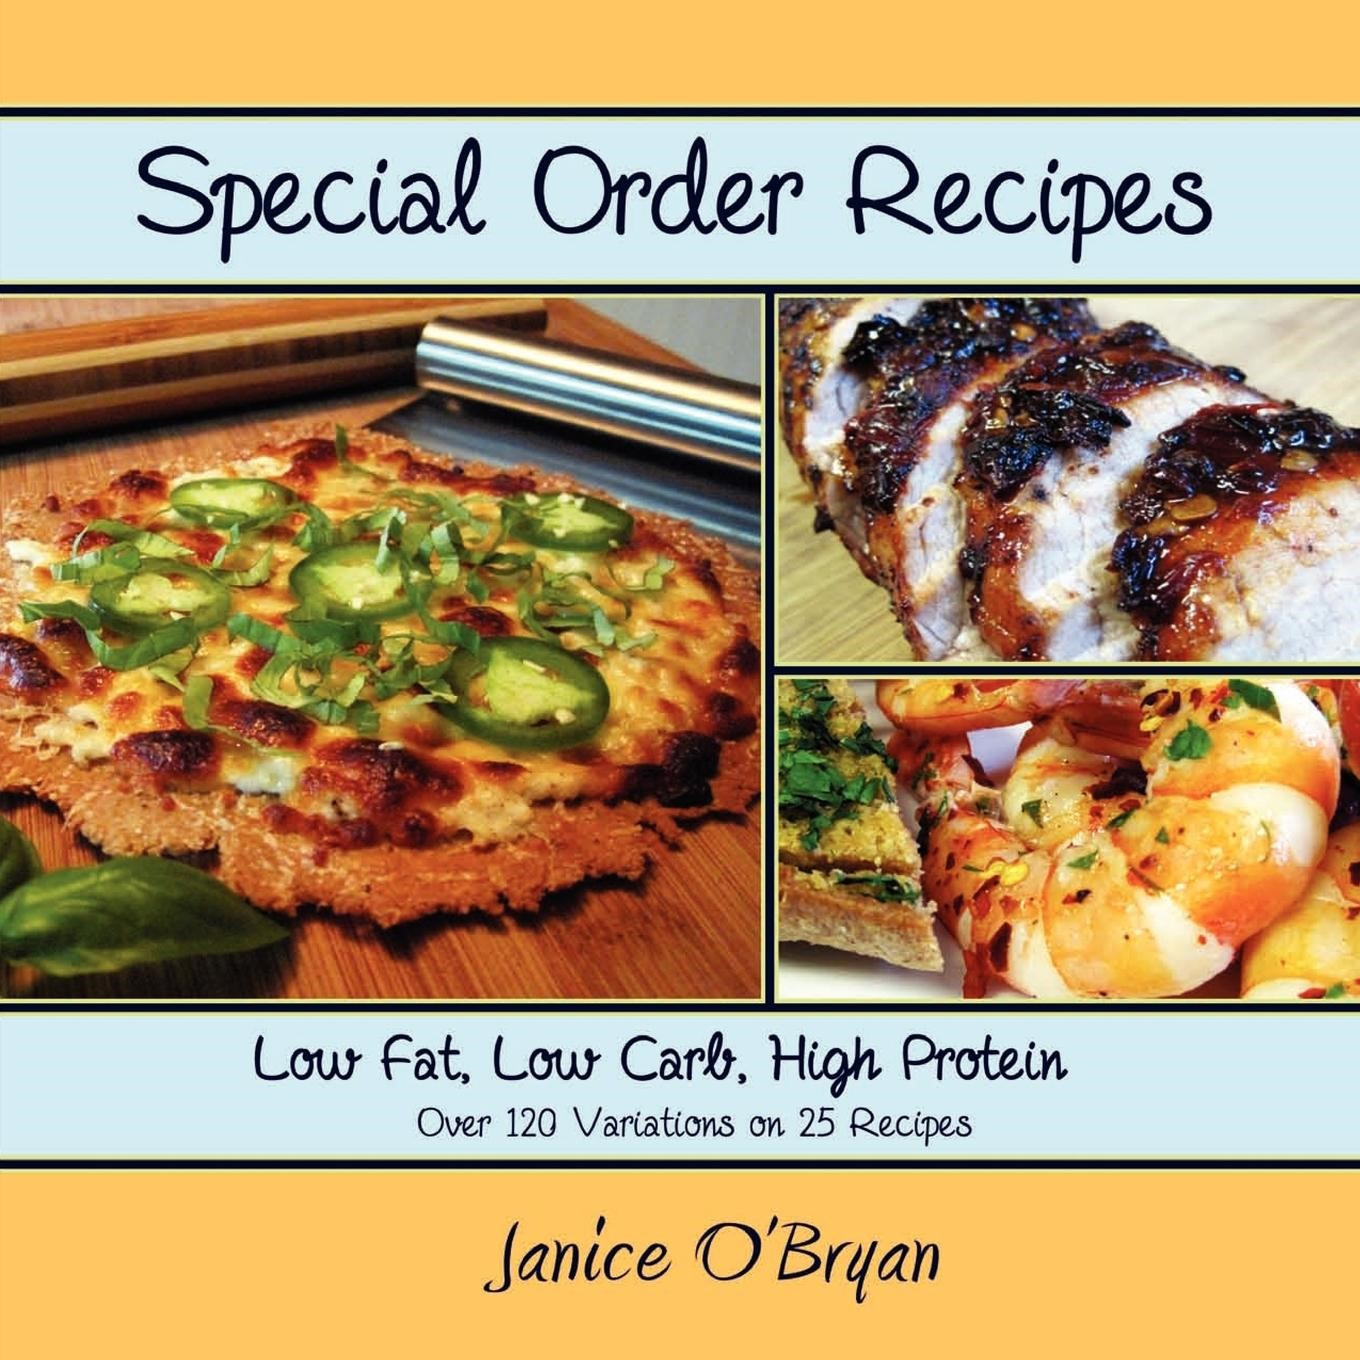 High Protein Low Calorie Recipes
 Special Order Recipes Low Fat Low Carb High Protein